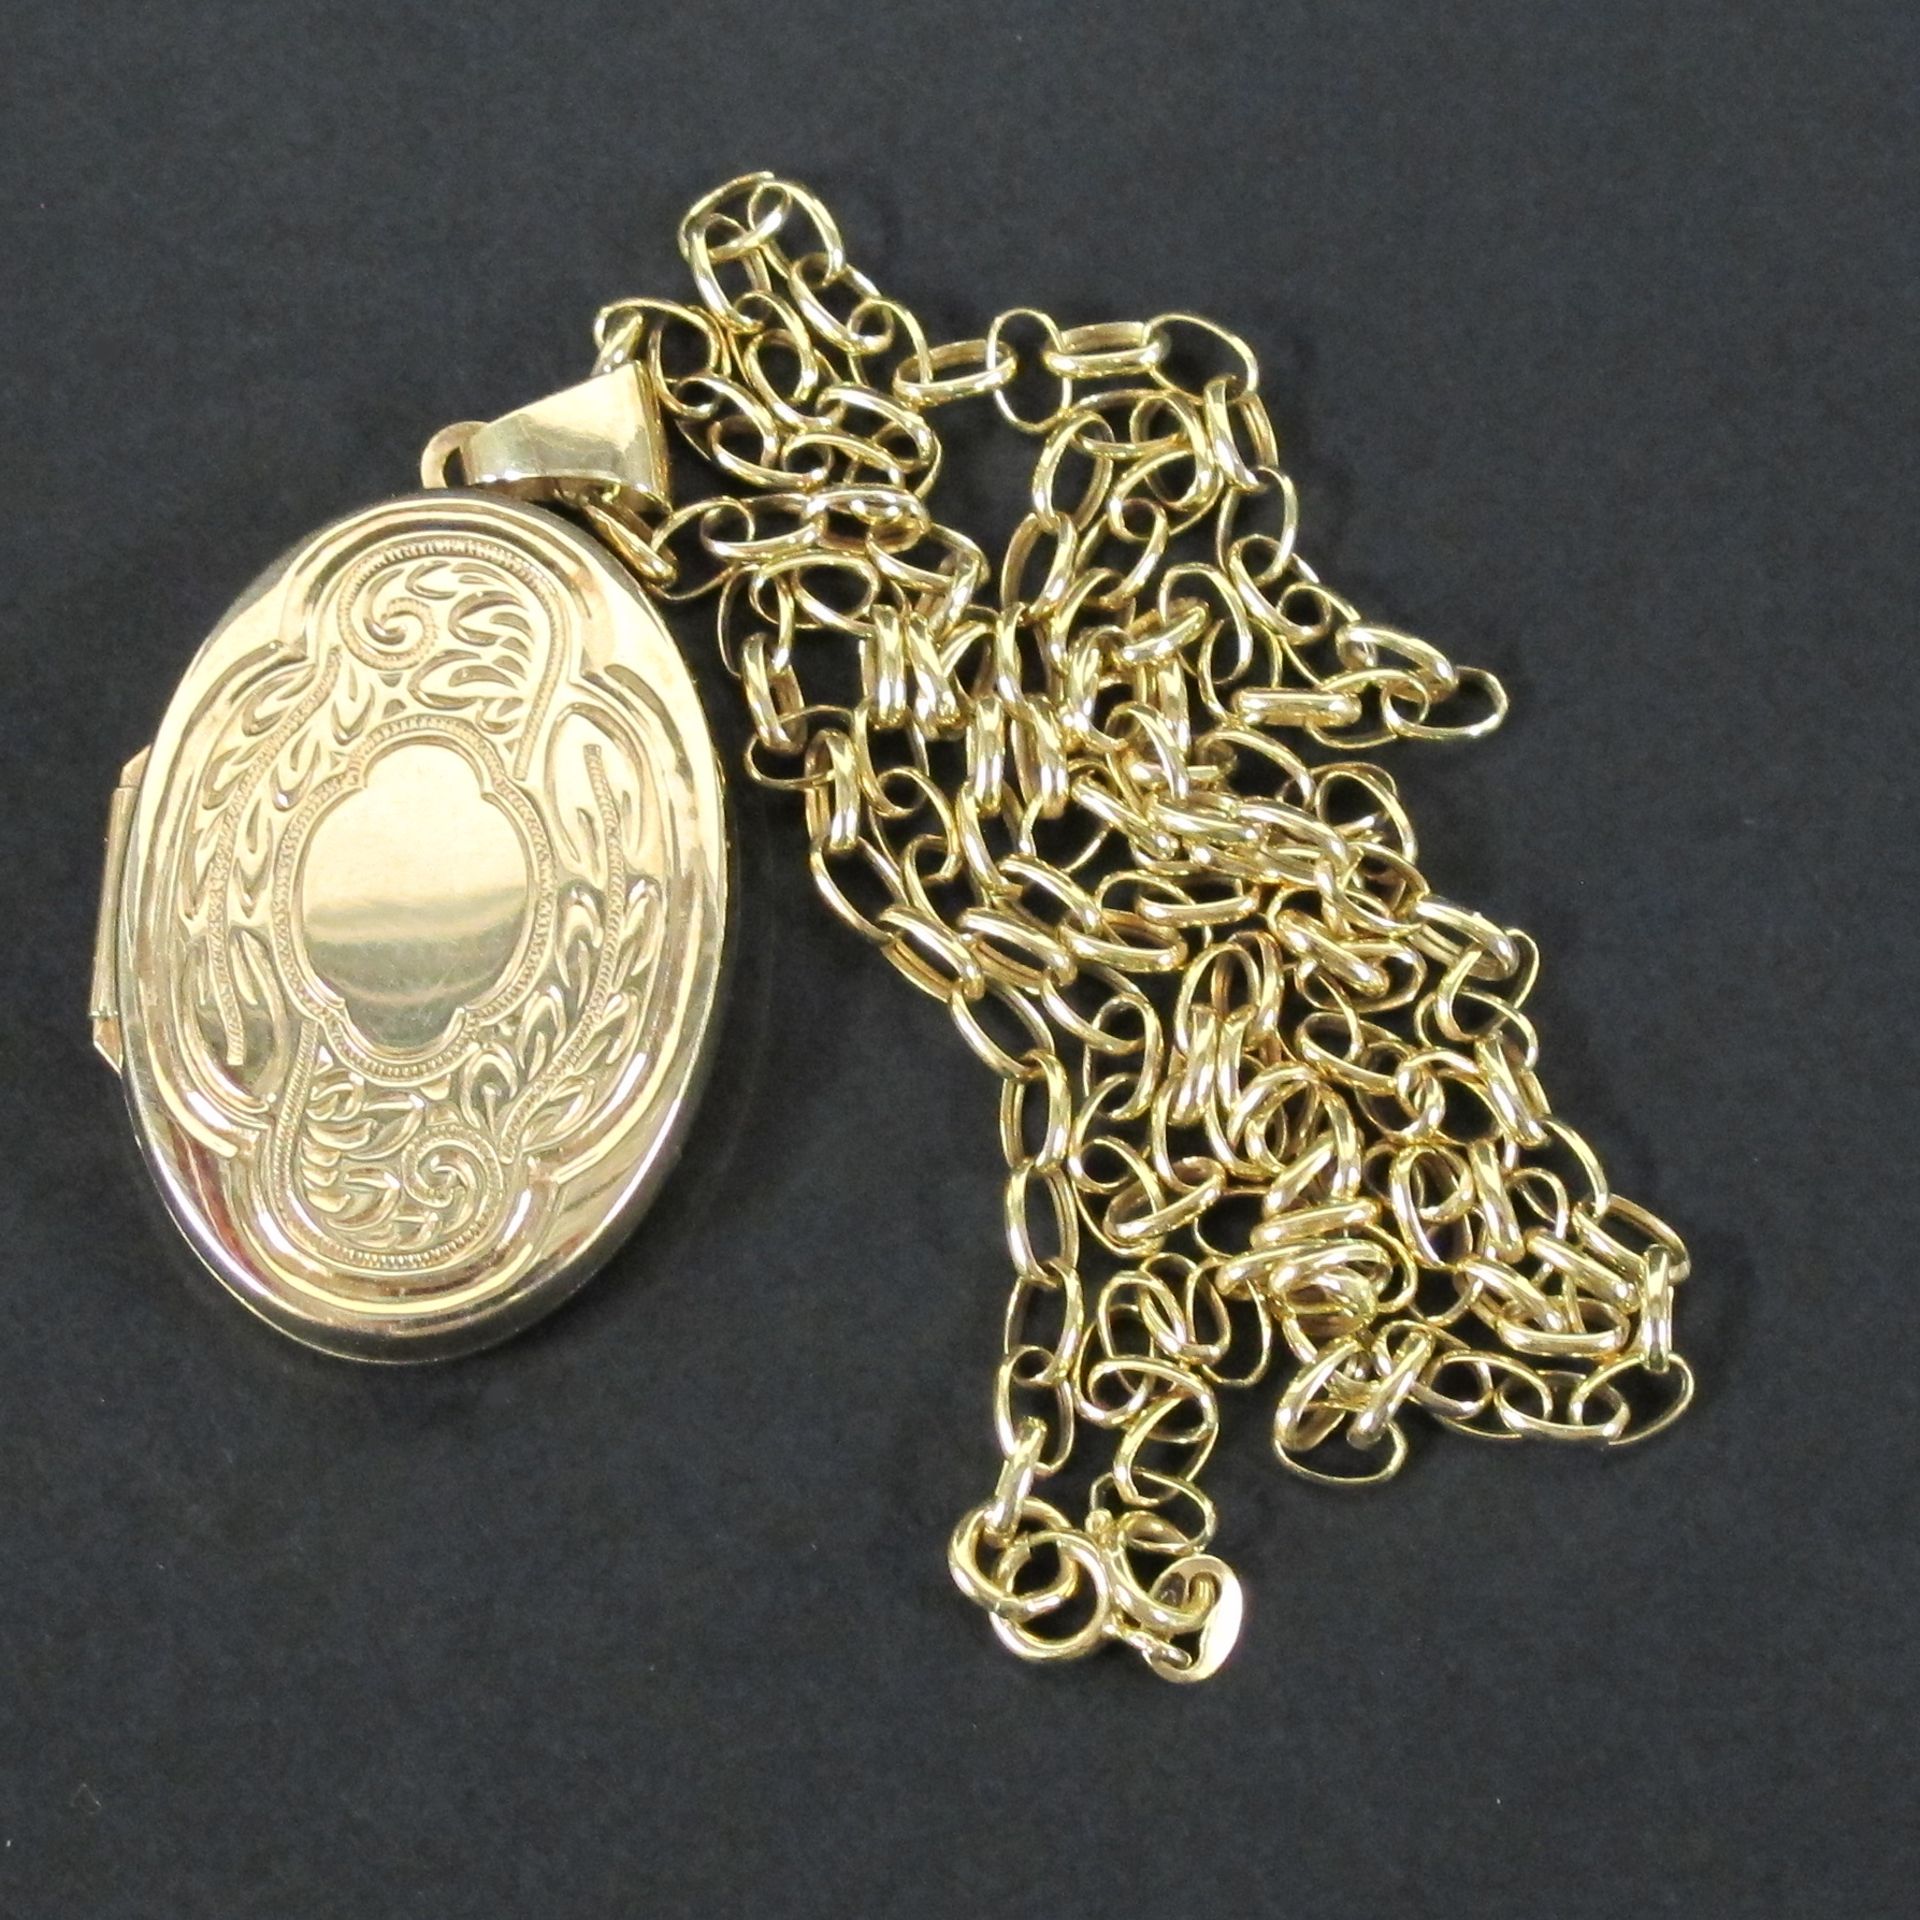 9ct gold locket on 9ct gold chain (approx. 5g) (est £80-£120) - Image 3 of 3